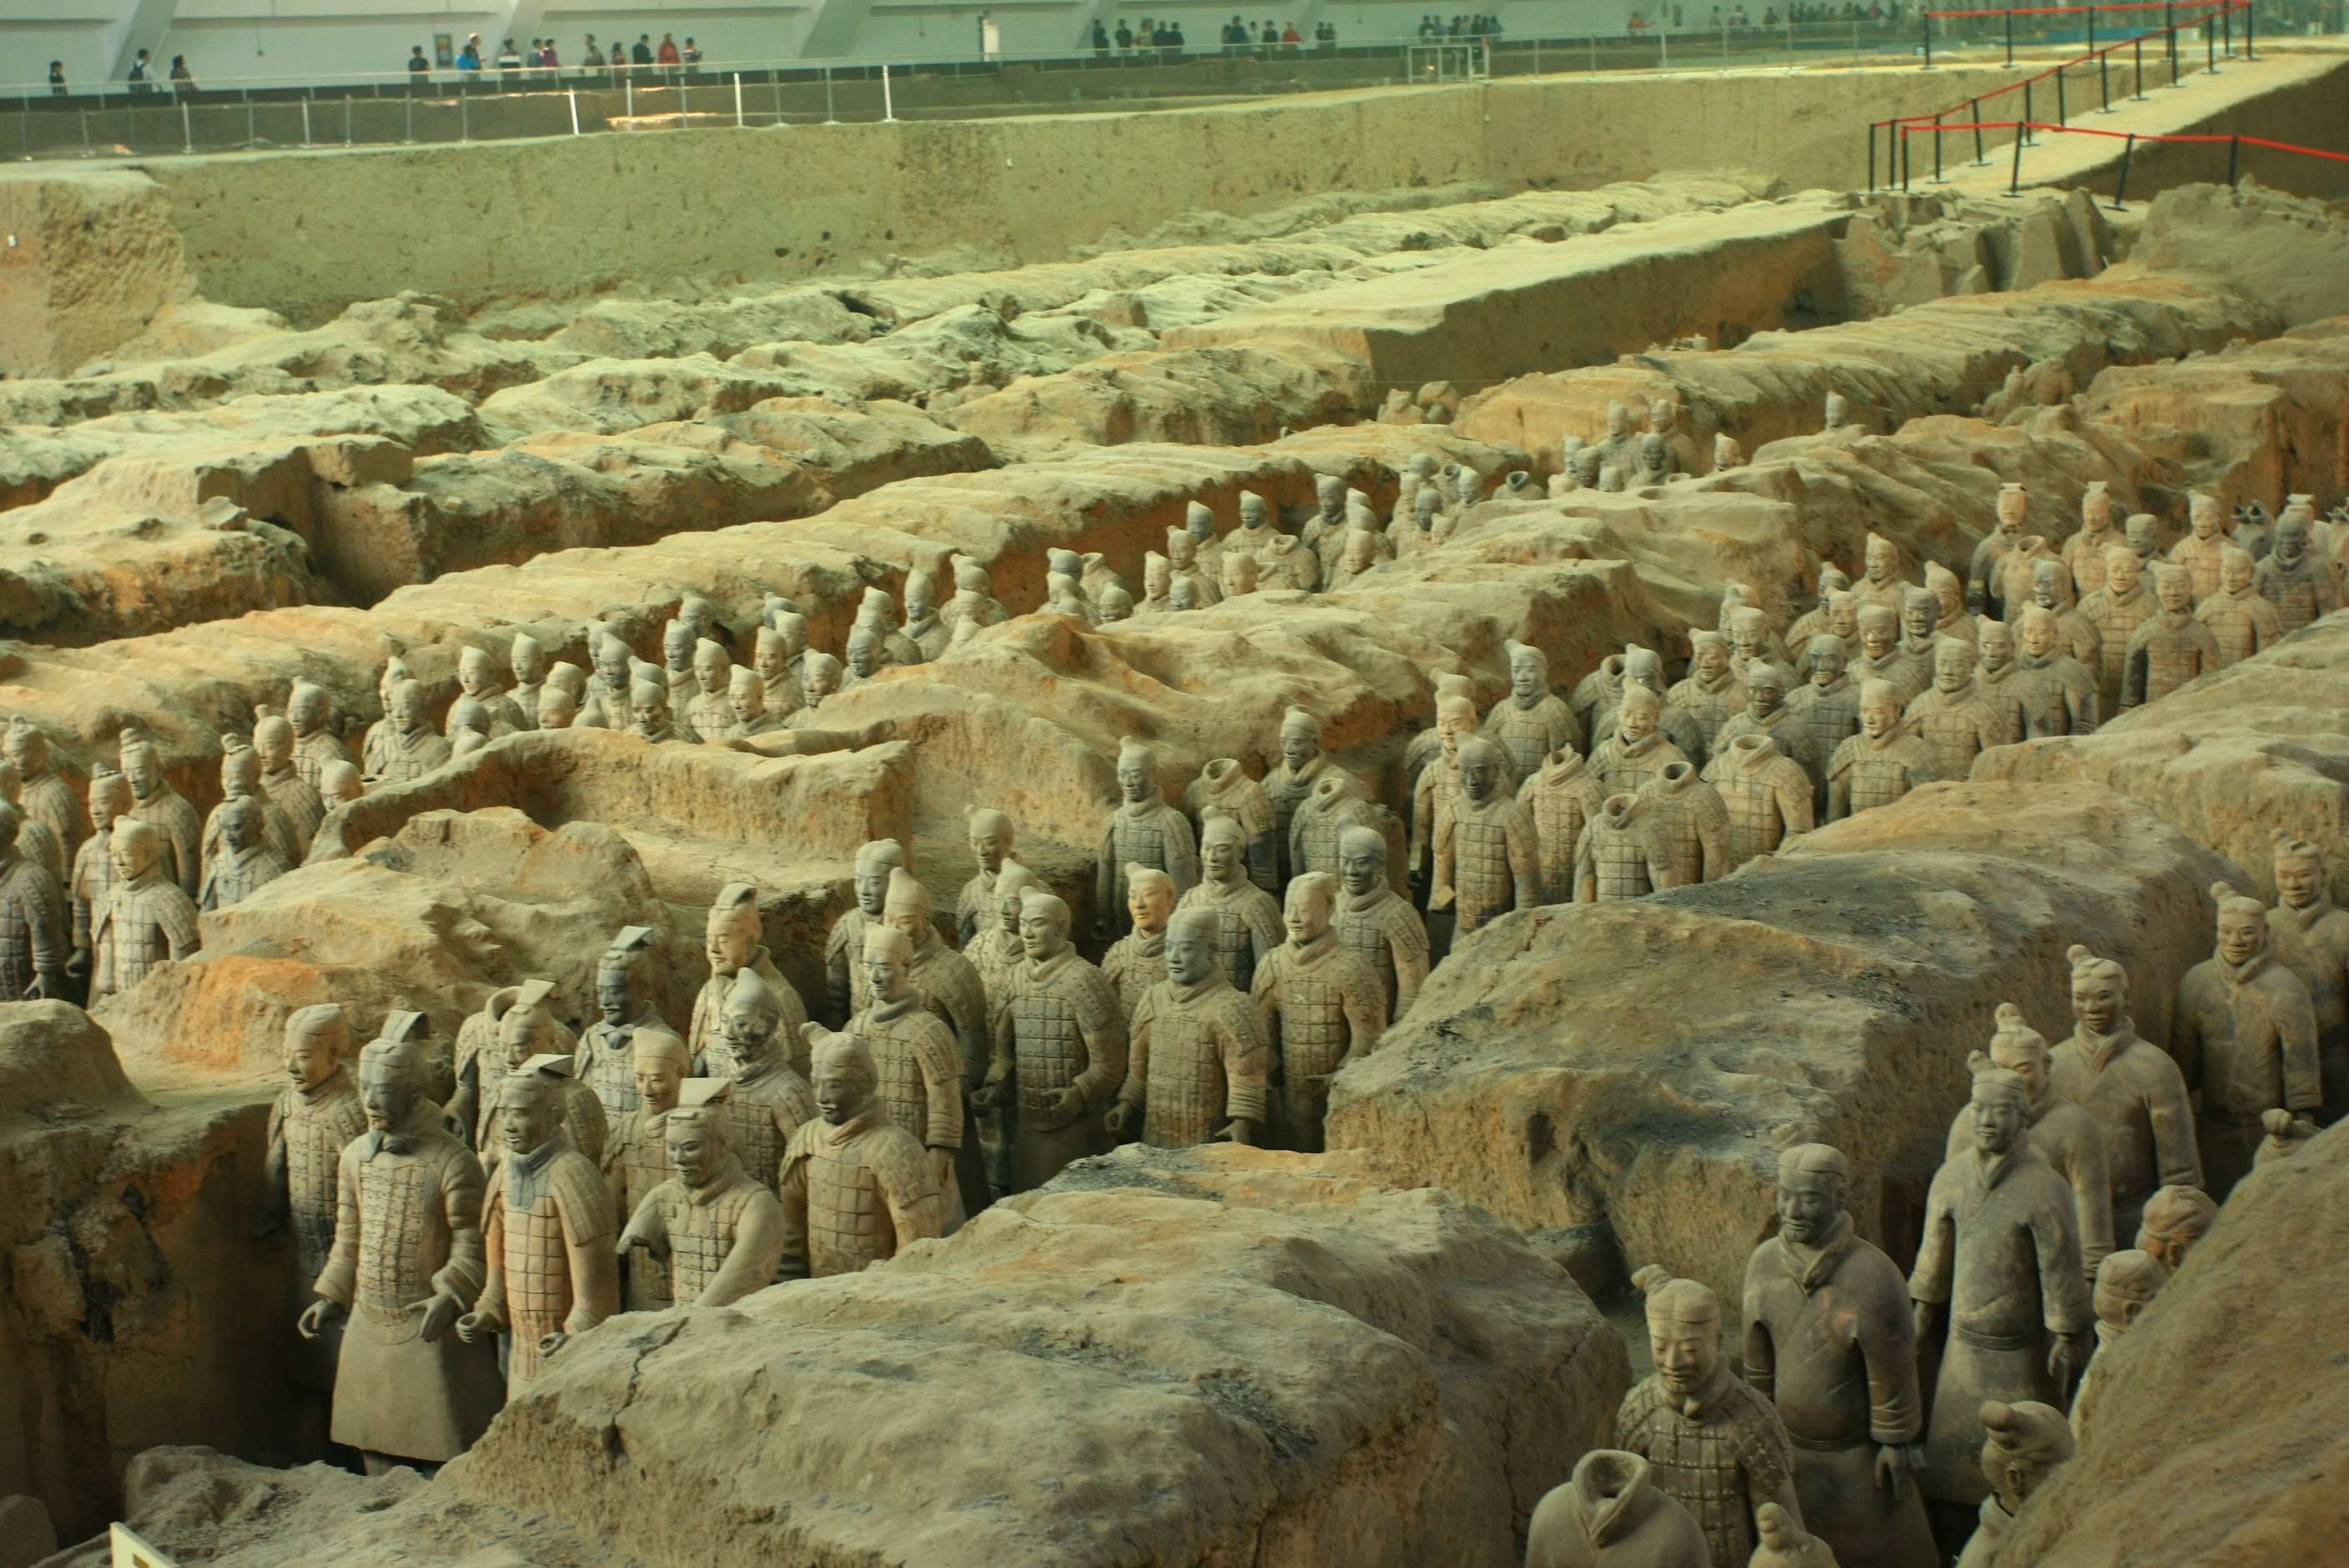 The famous Terracotta warrior sare among the many treasures from the ancient world in Xian. Photo: ImagineChina